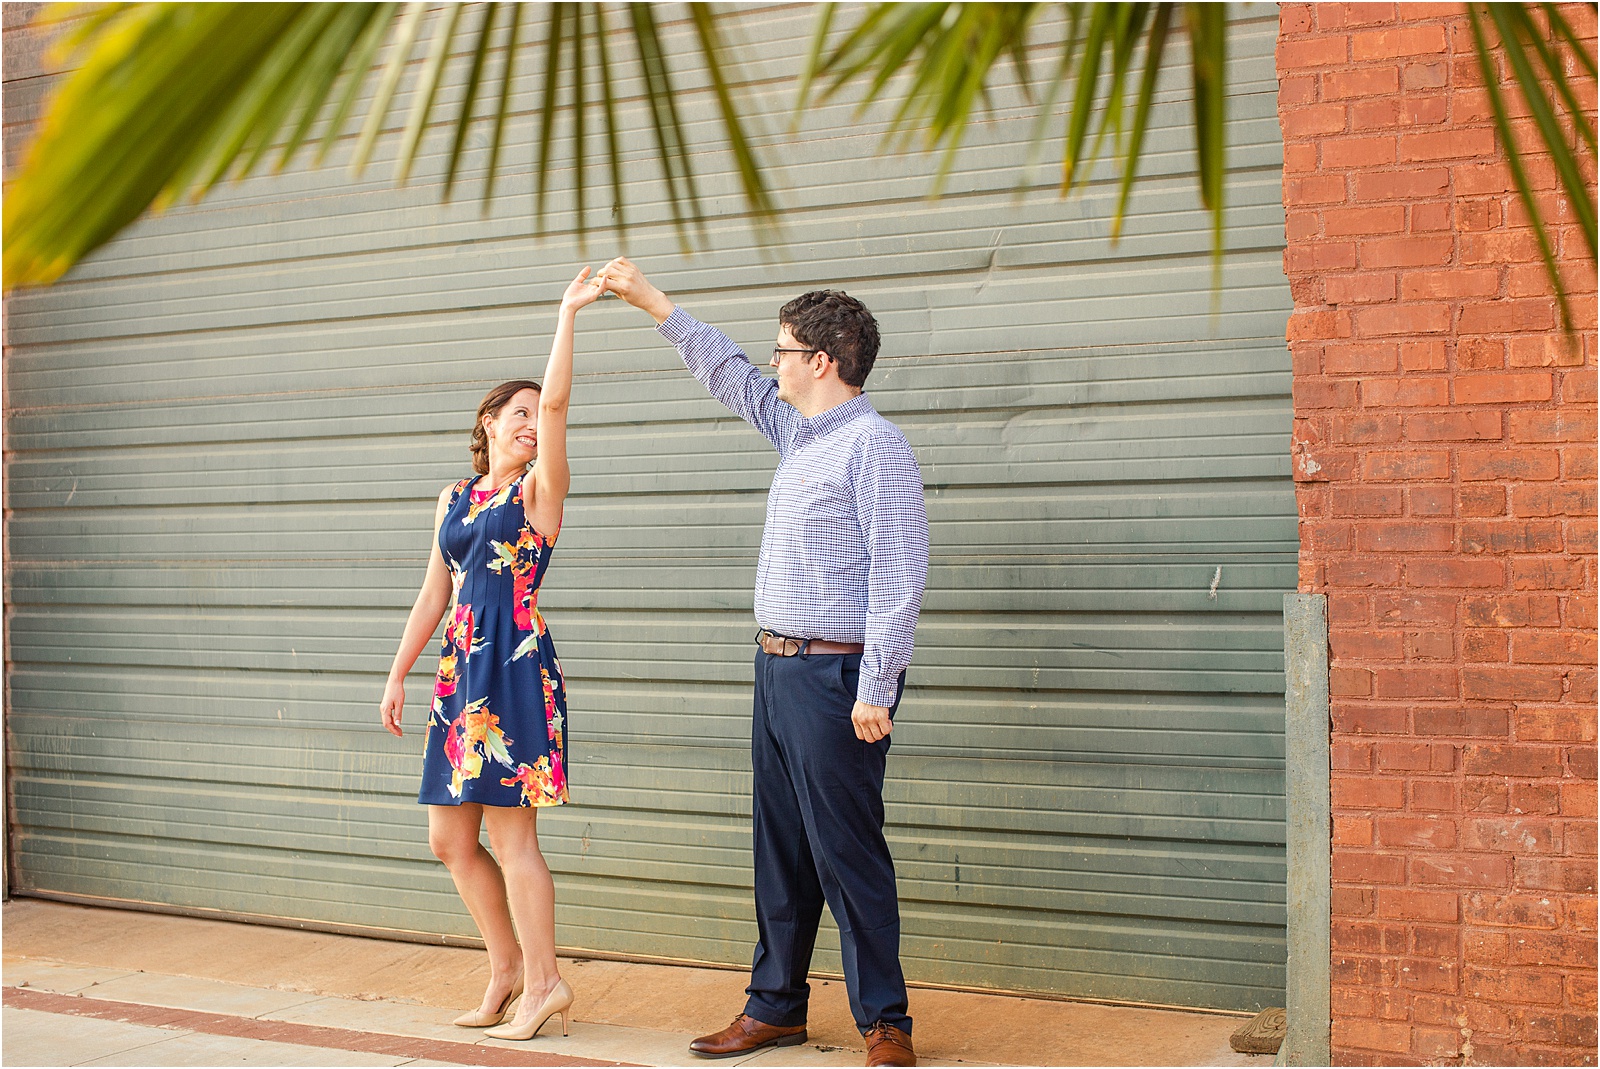 Guy twirling woman during engagement session